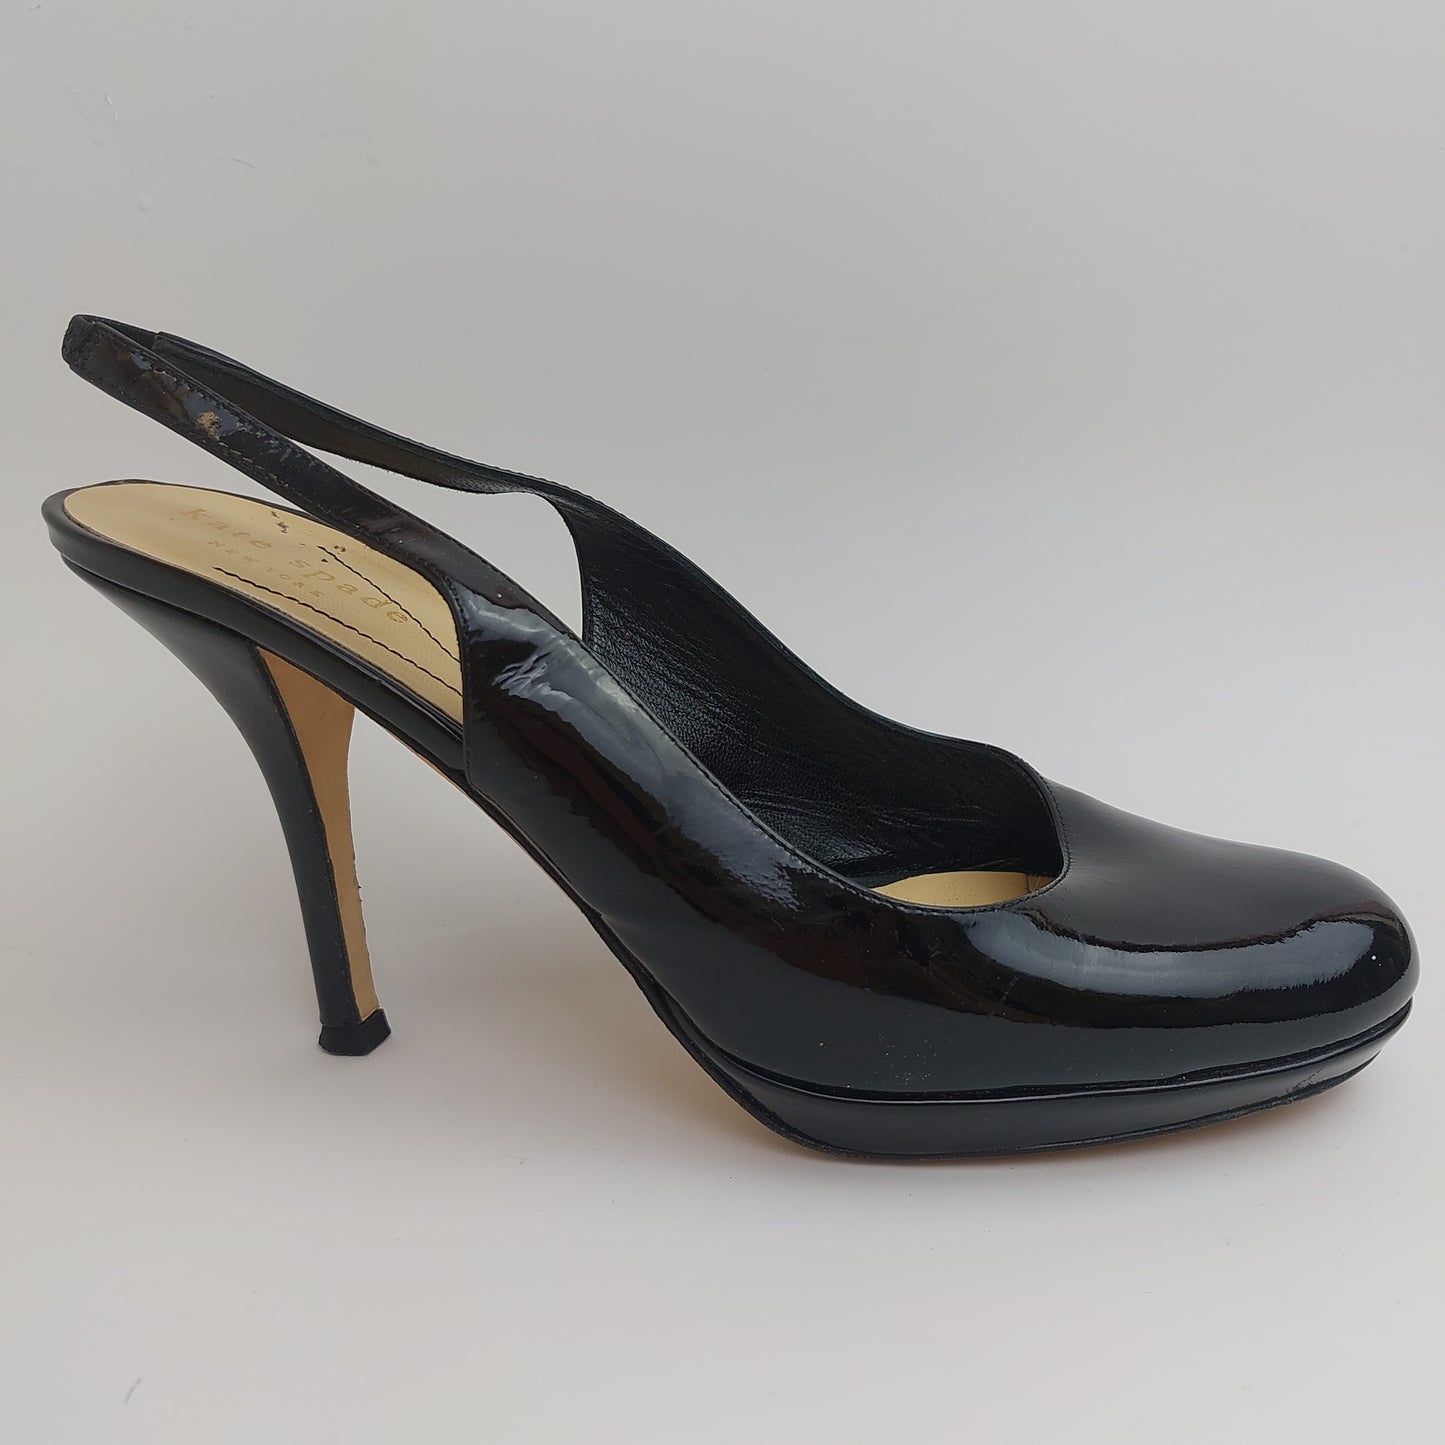 Kate Spade New York Patent Leather Sling back Heels 7.5